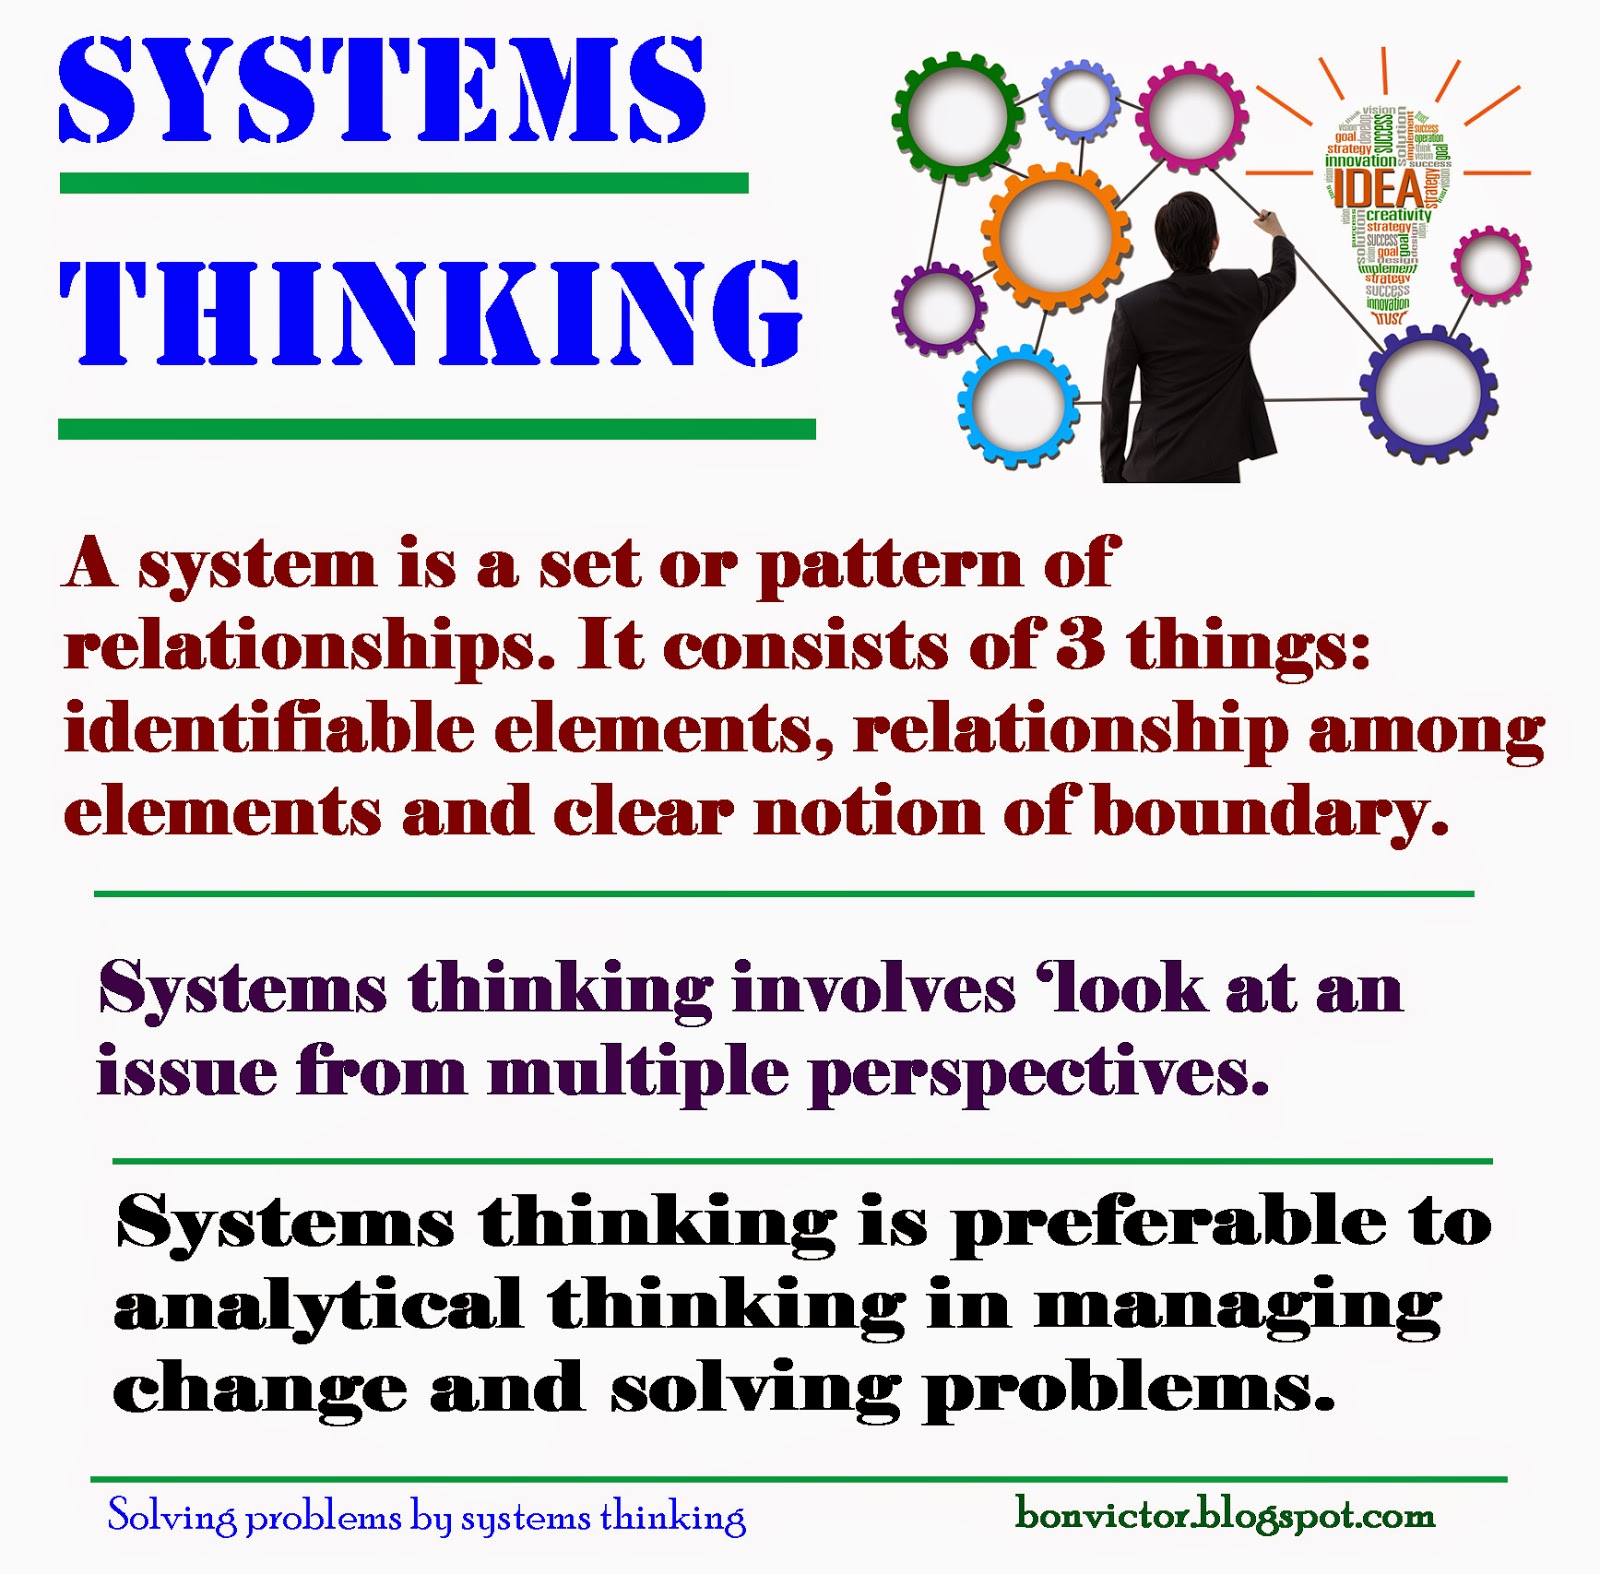 bonvictor-blogspot-systems-thinking-for-problem-solving